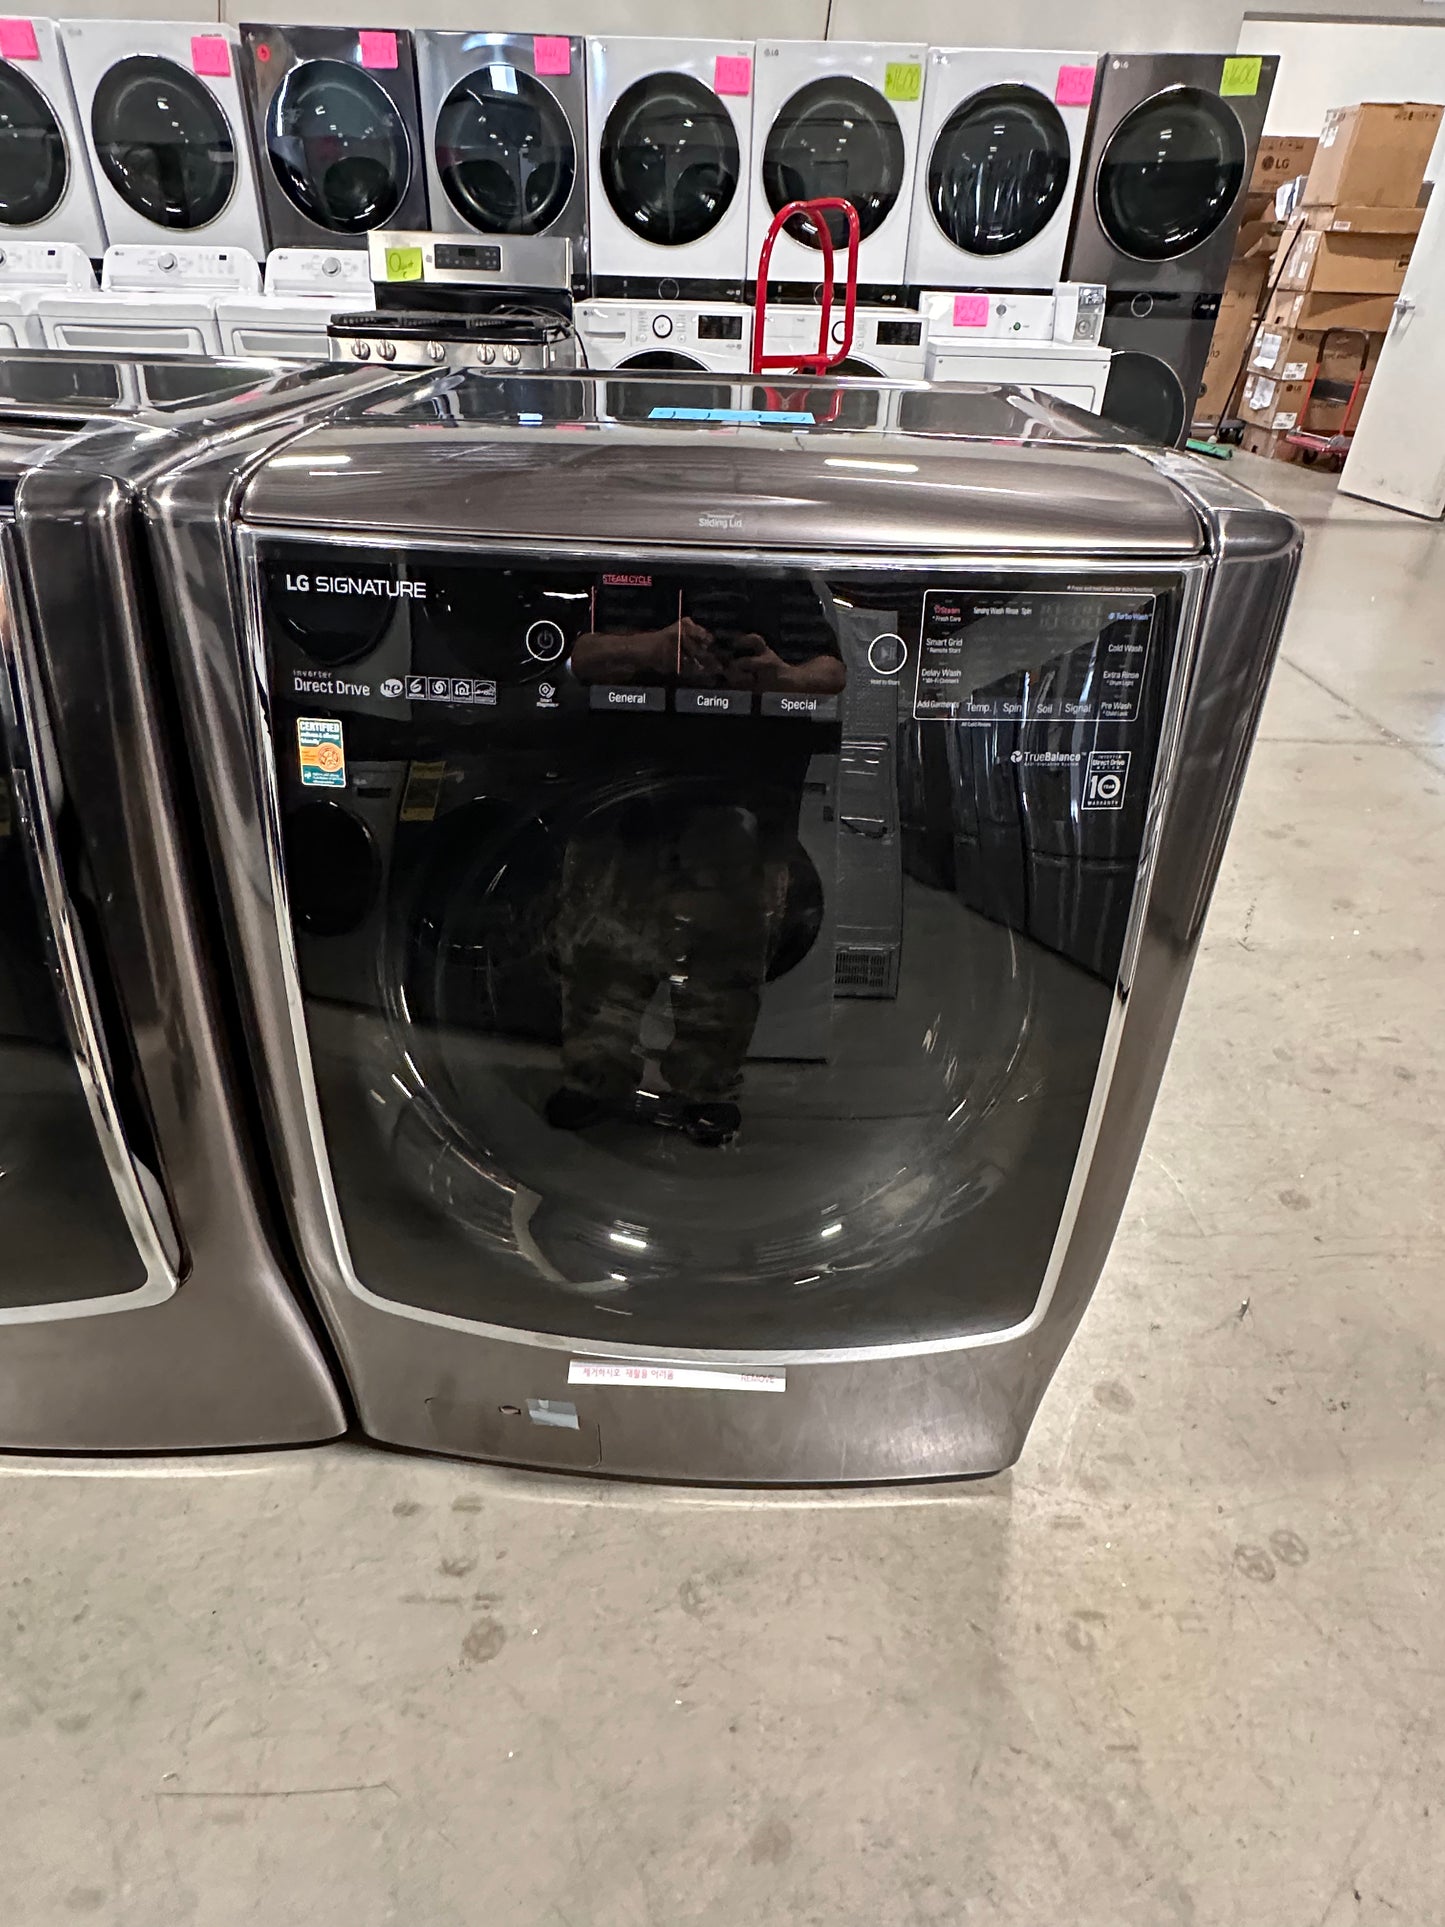 GORGEOUS NEW SMART FRONT LOAD WASHER WITH STEAM - WAS12697